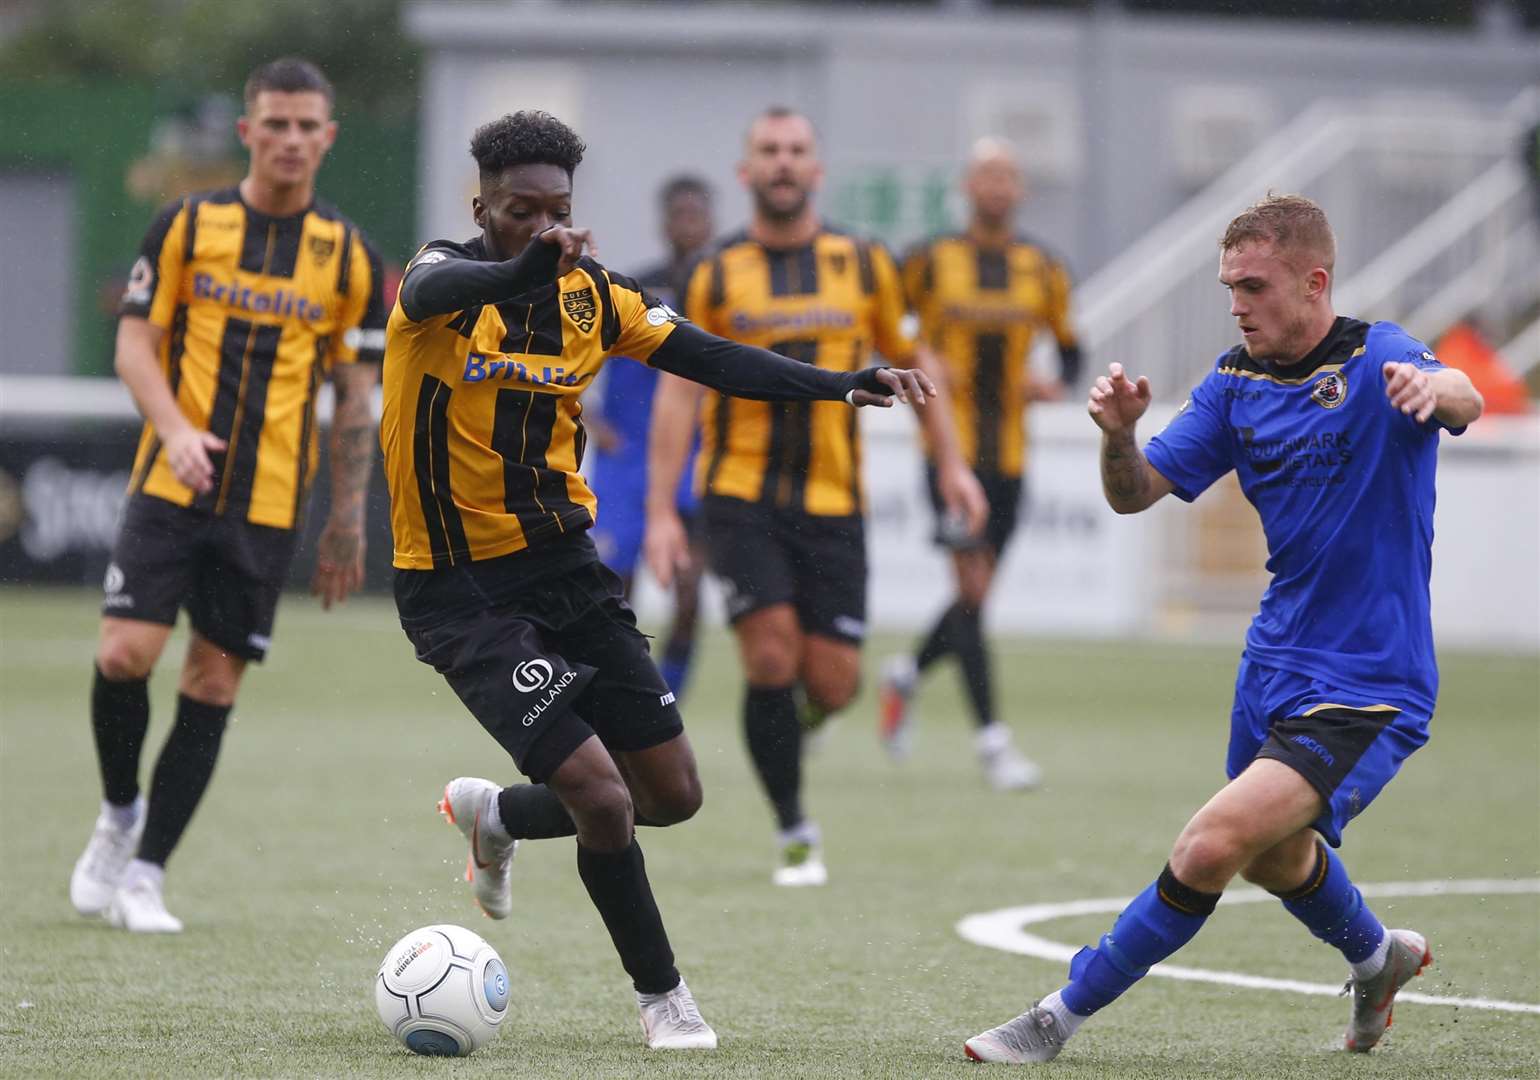 Blair Turgott in the thick of the action Picture: Andy Jones